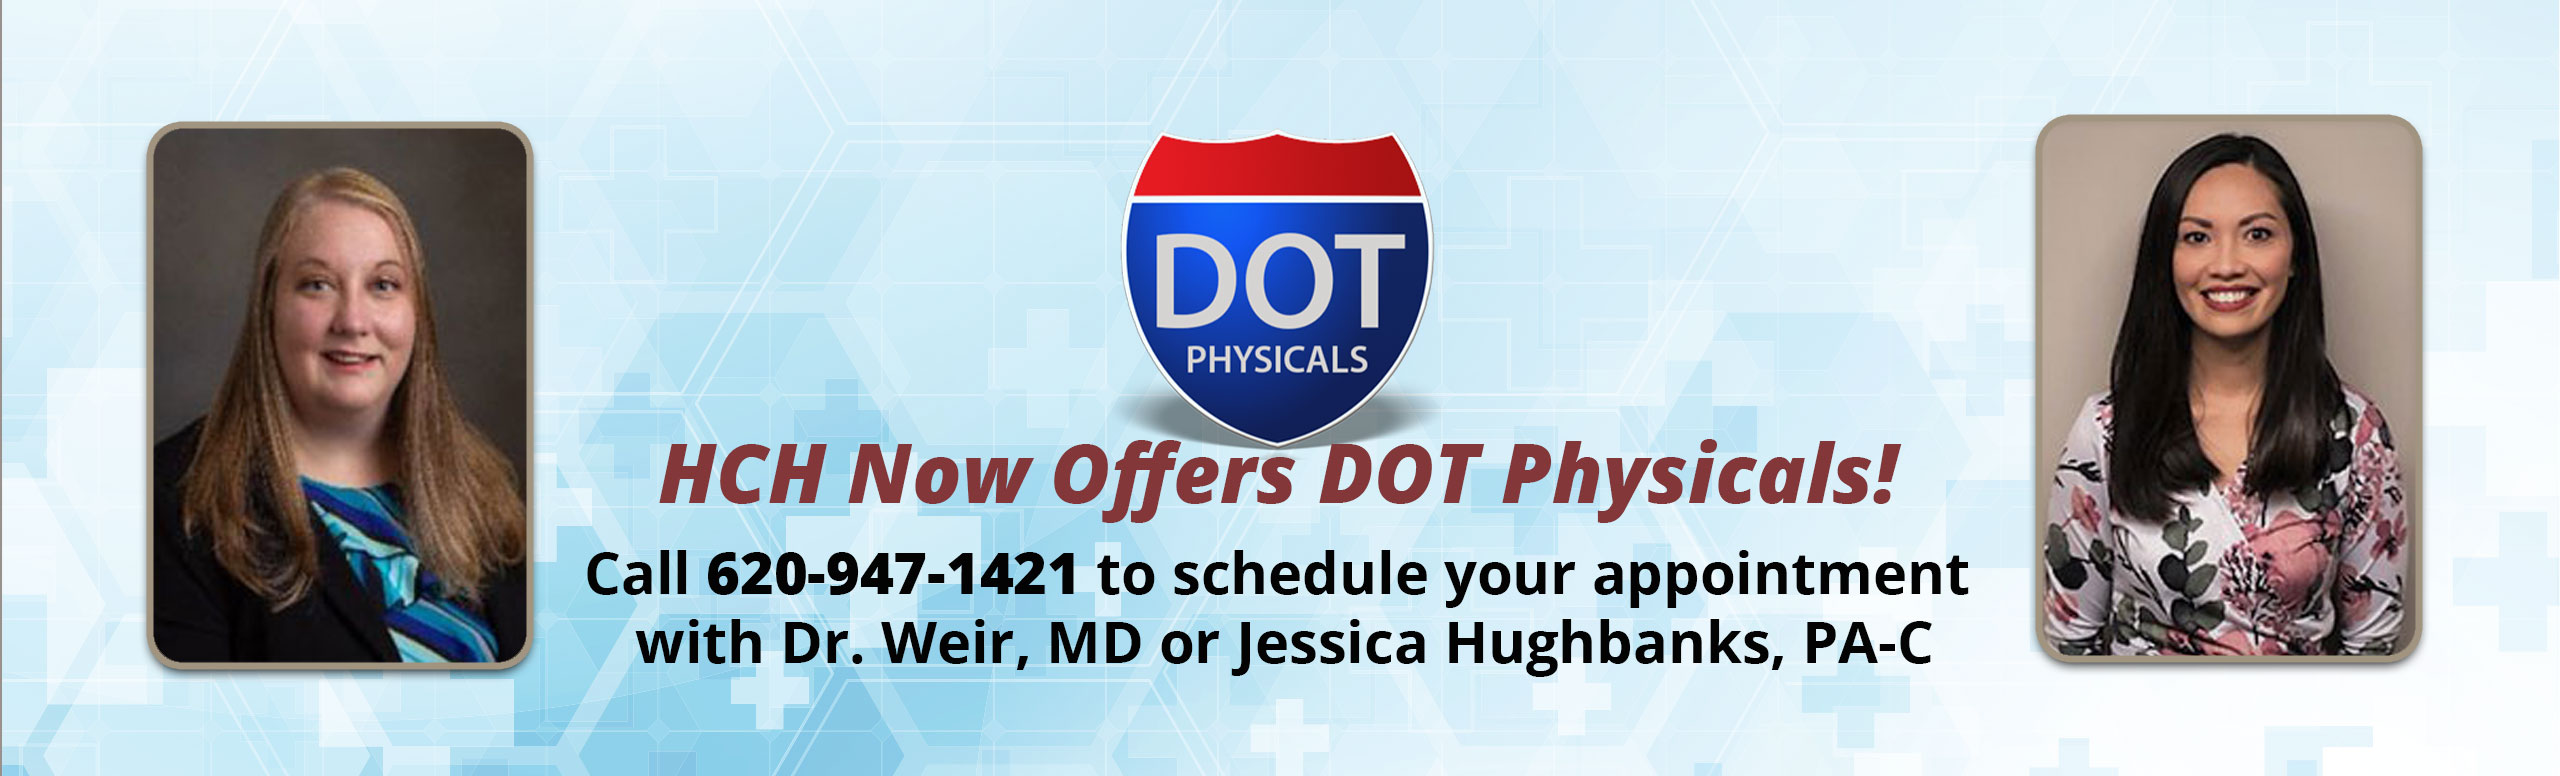 Banner picture of Dr. Weir, MD and Jessica Hughbanks, PA-C , smiling. Banner says:

HCH Now Offers DOT Physicals!
call 620-947-1521 to schedule your appointment with Dr. Weir, MD or Jessica Hughbanks, PA-C